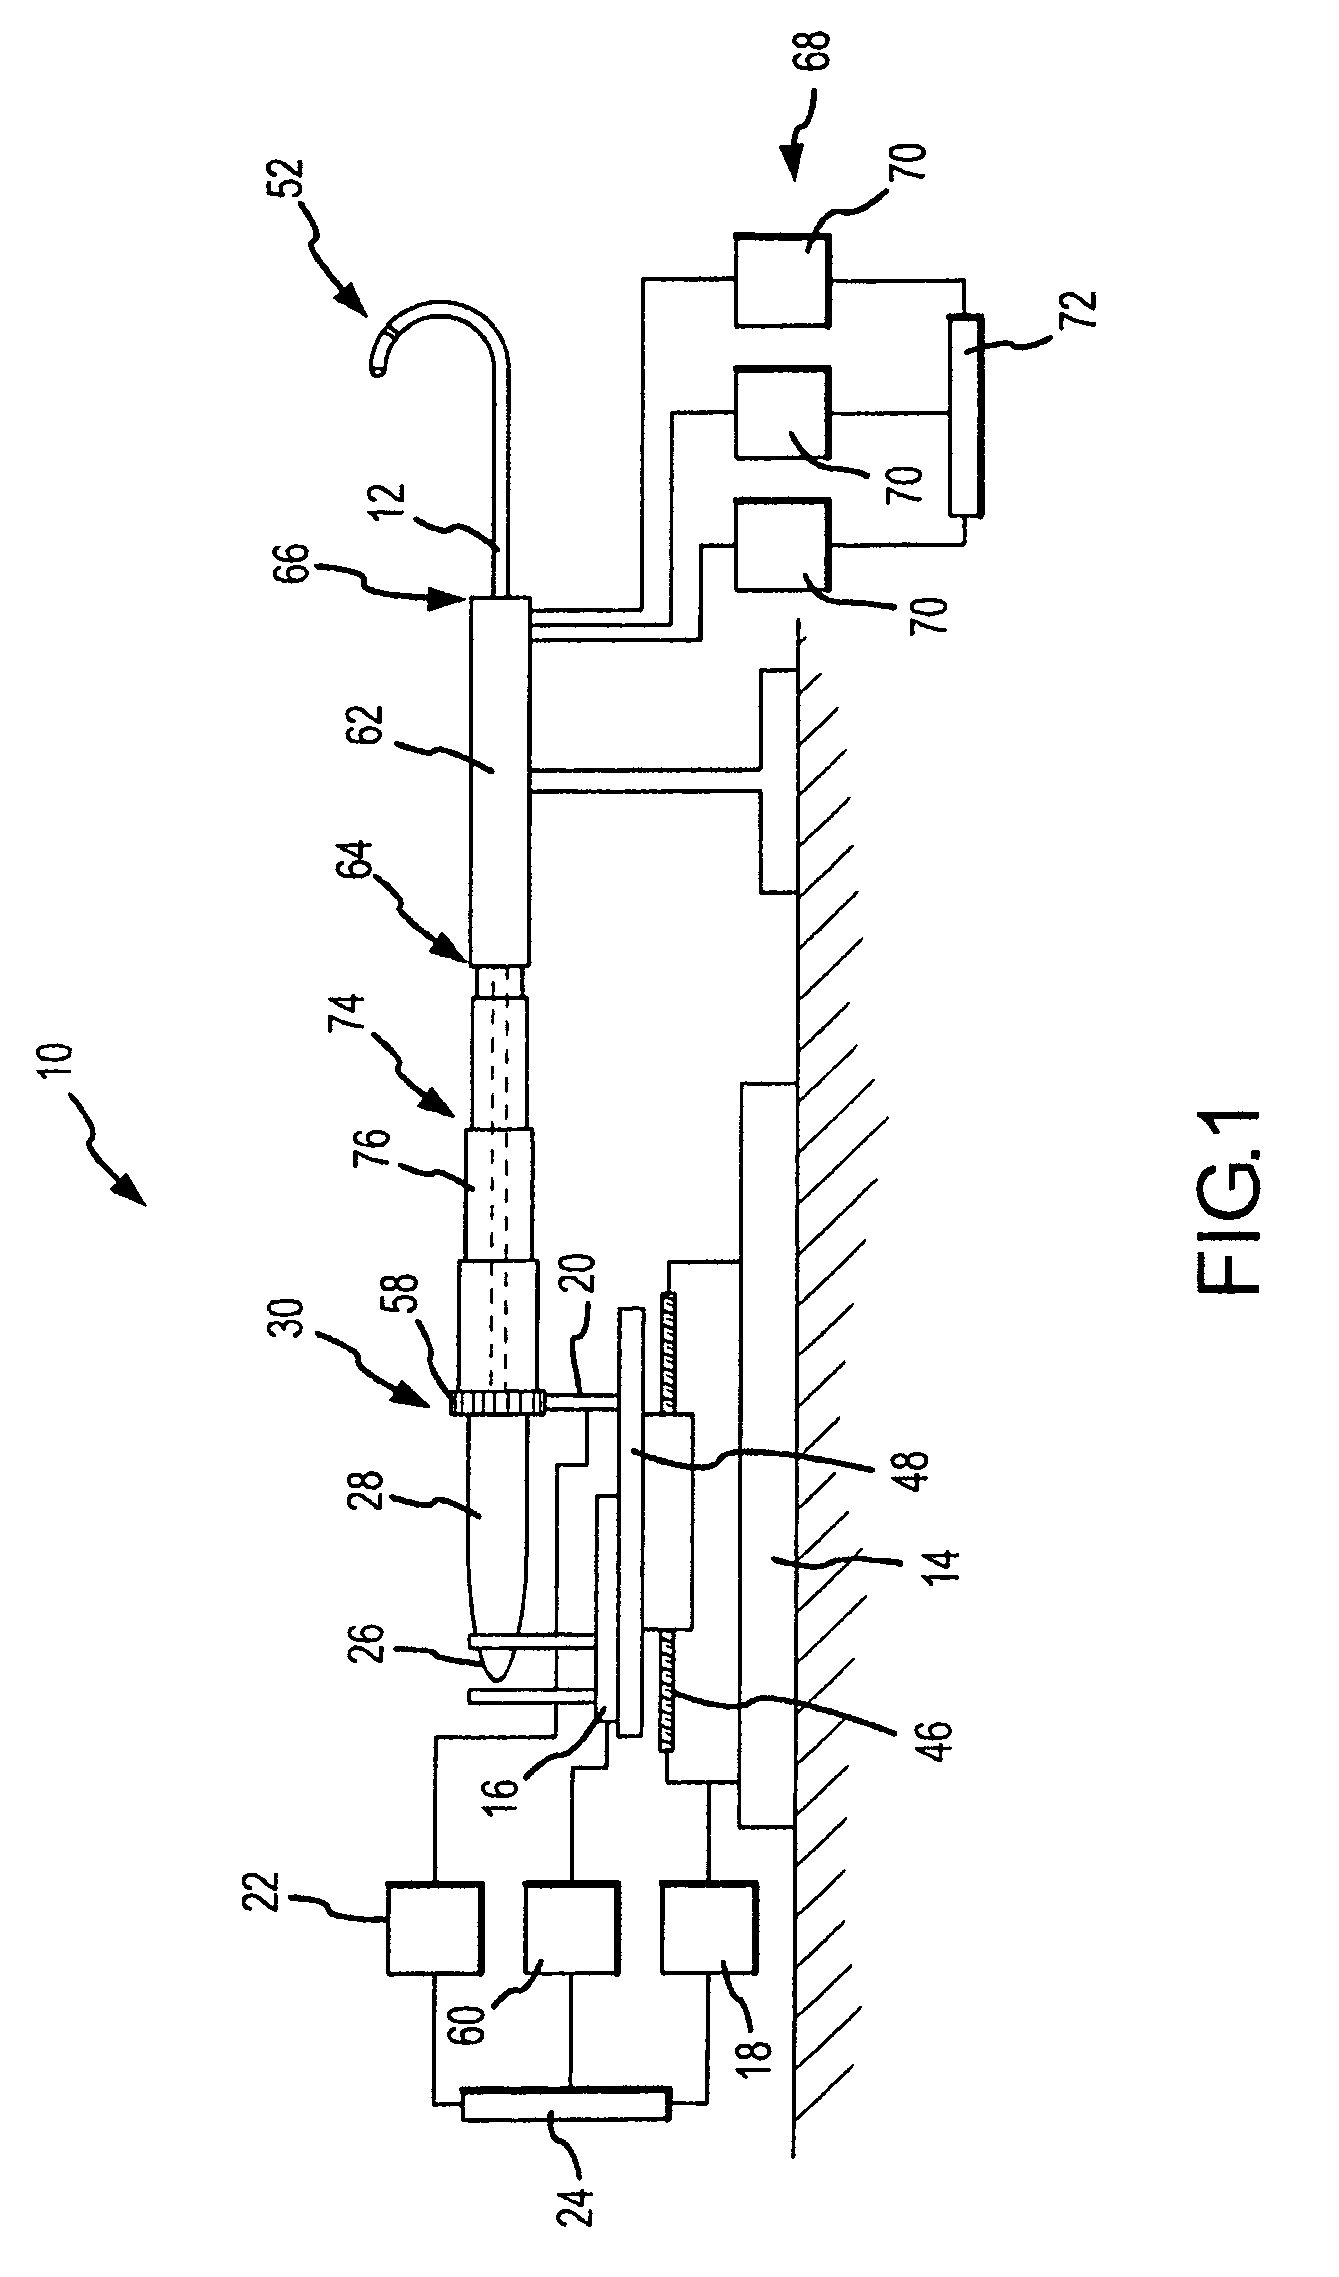 Robotic surgical system and method for surface modeling